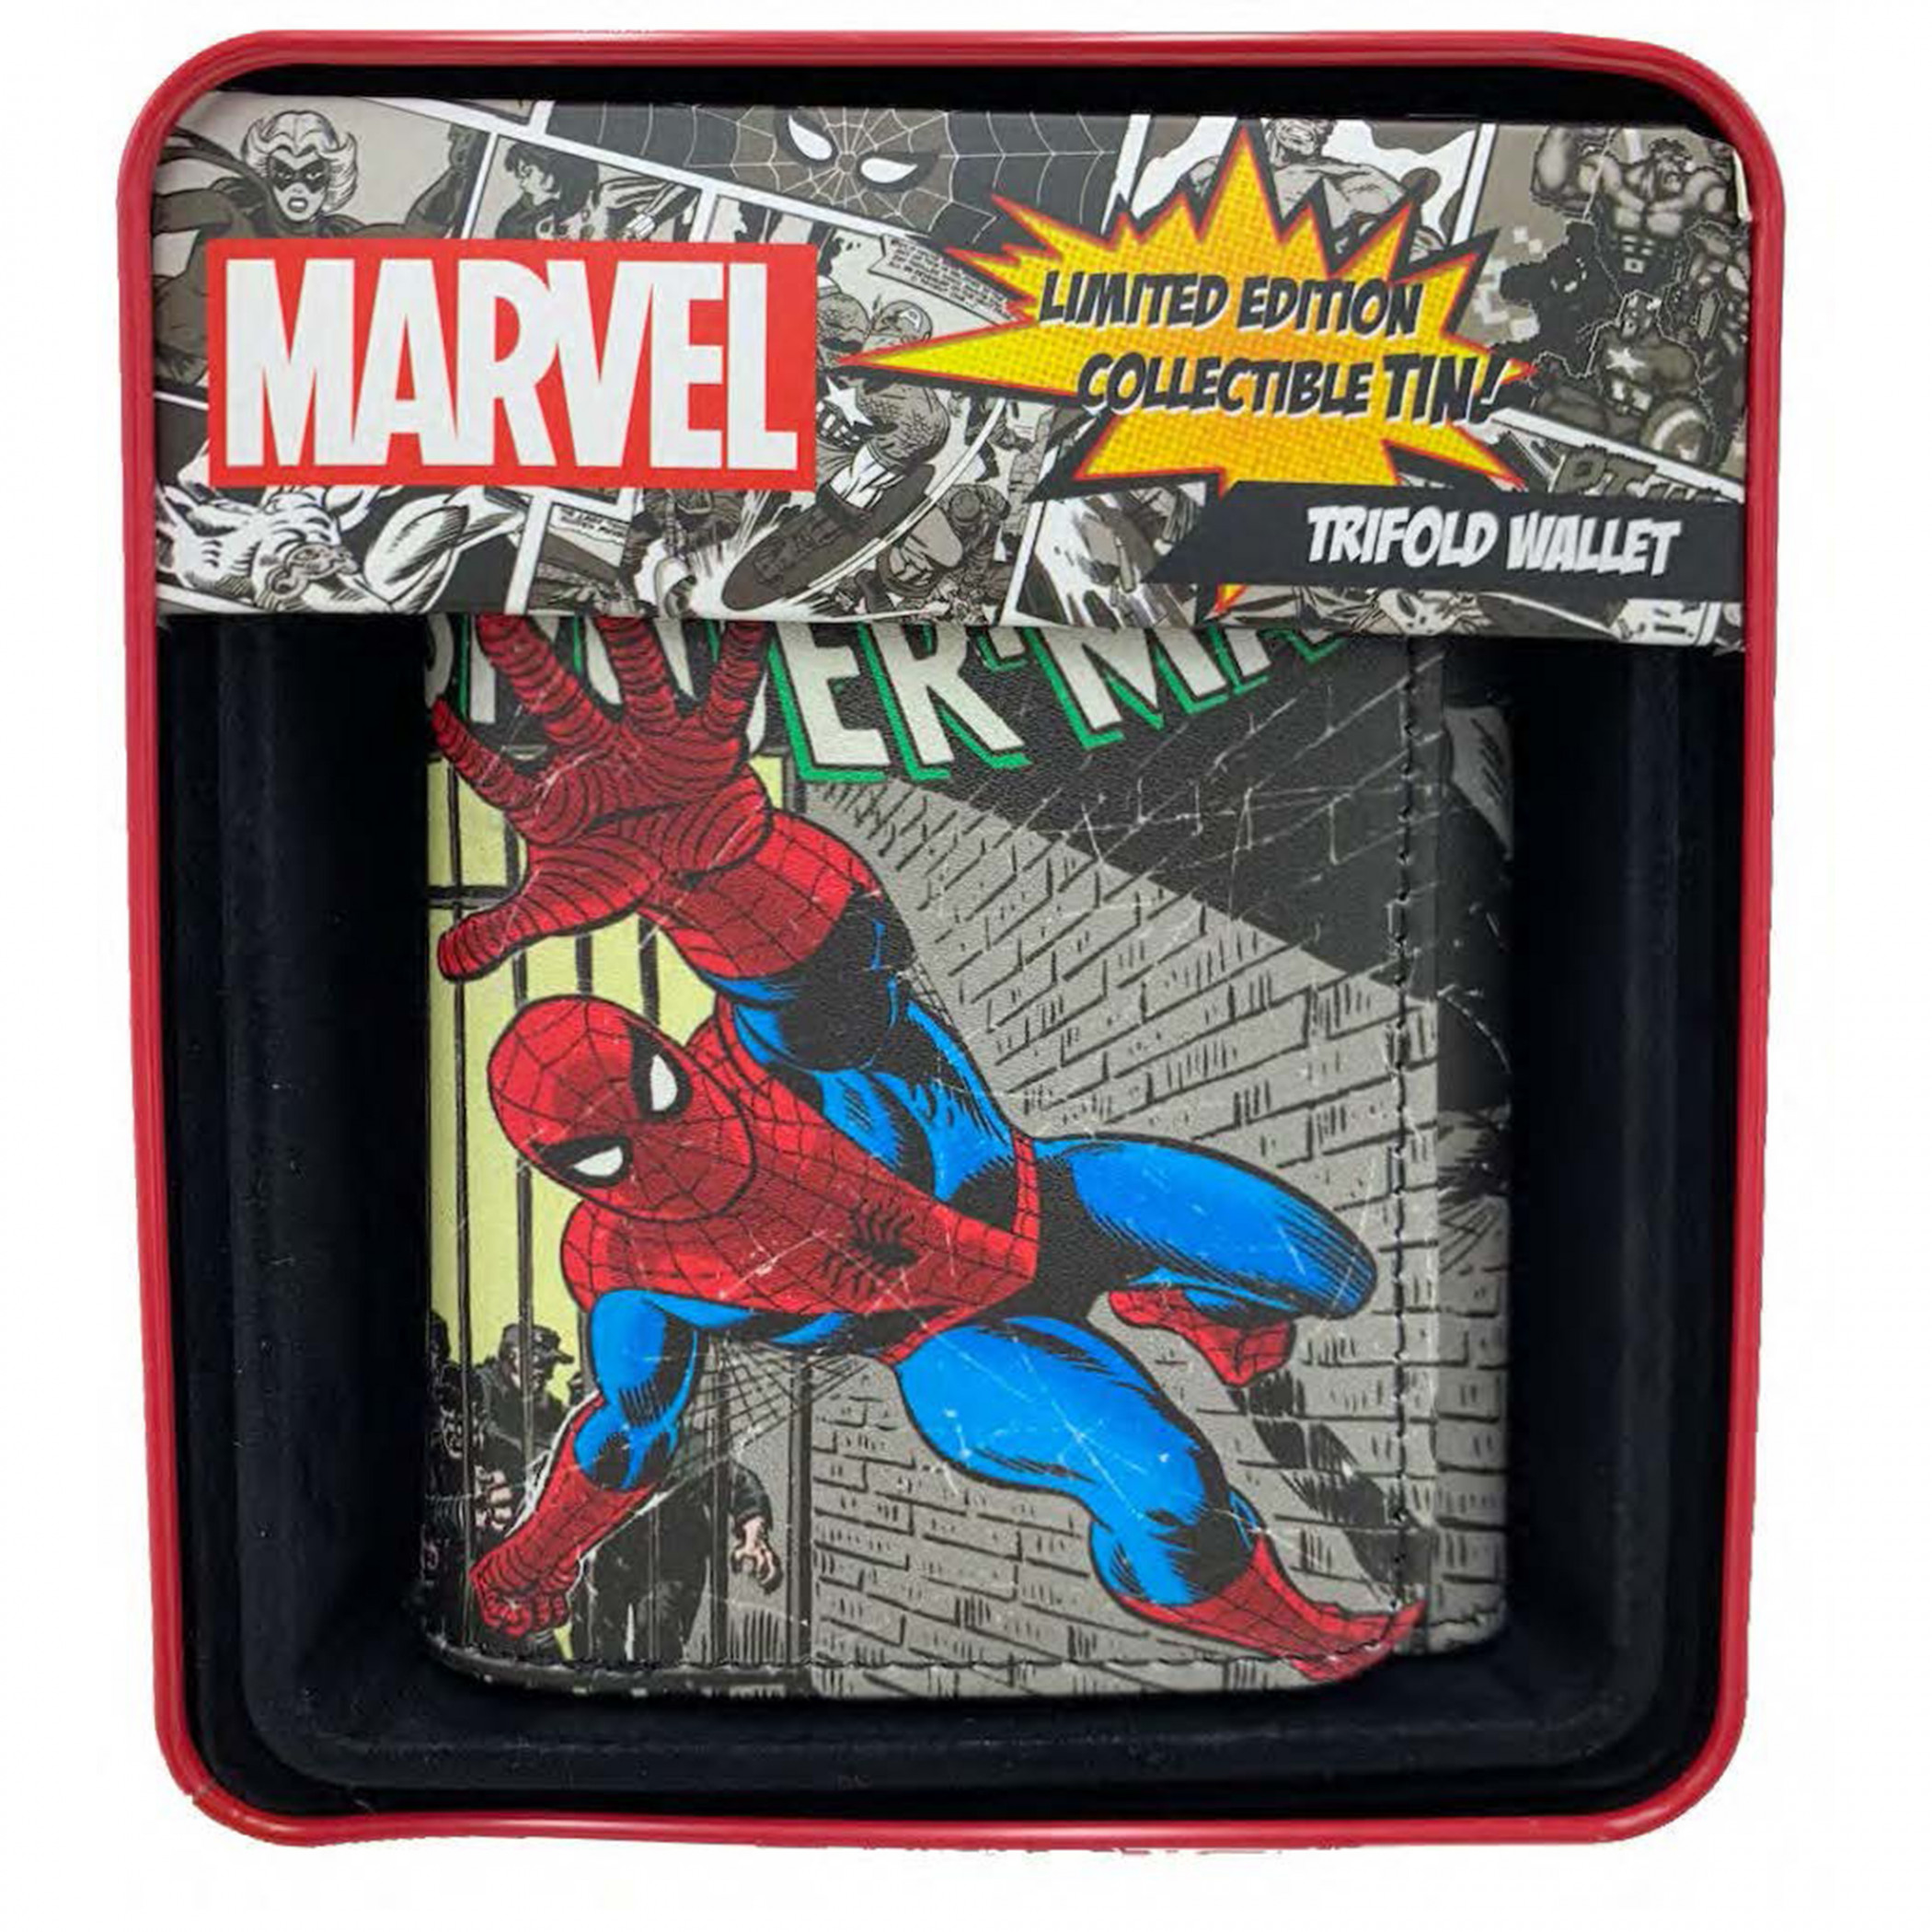 The Amazing Spider-Man #65 Cover Trifold Wallet